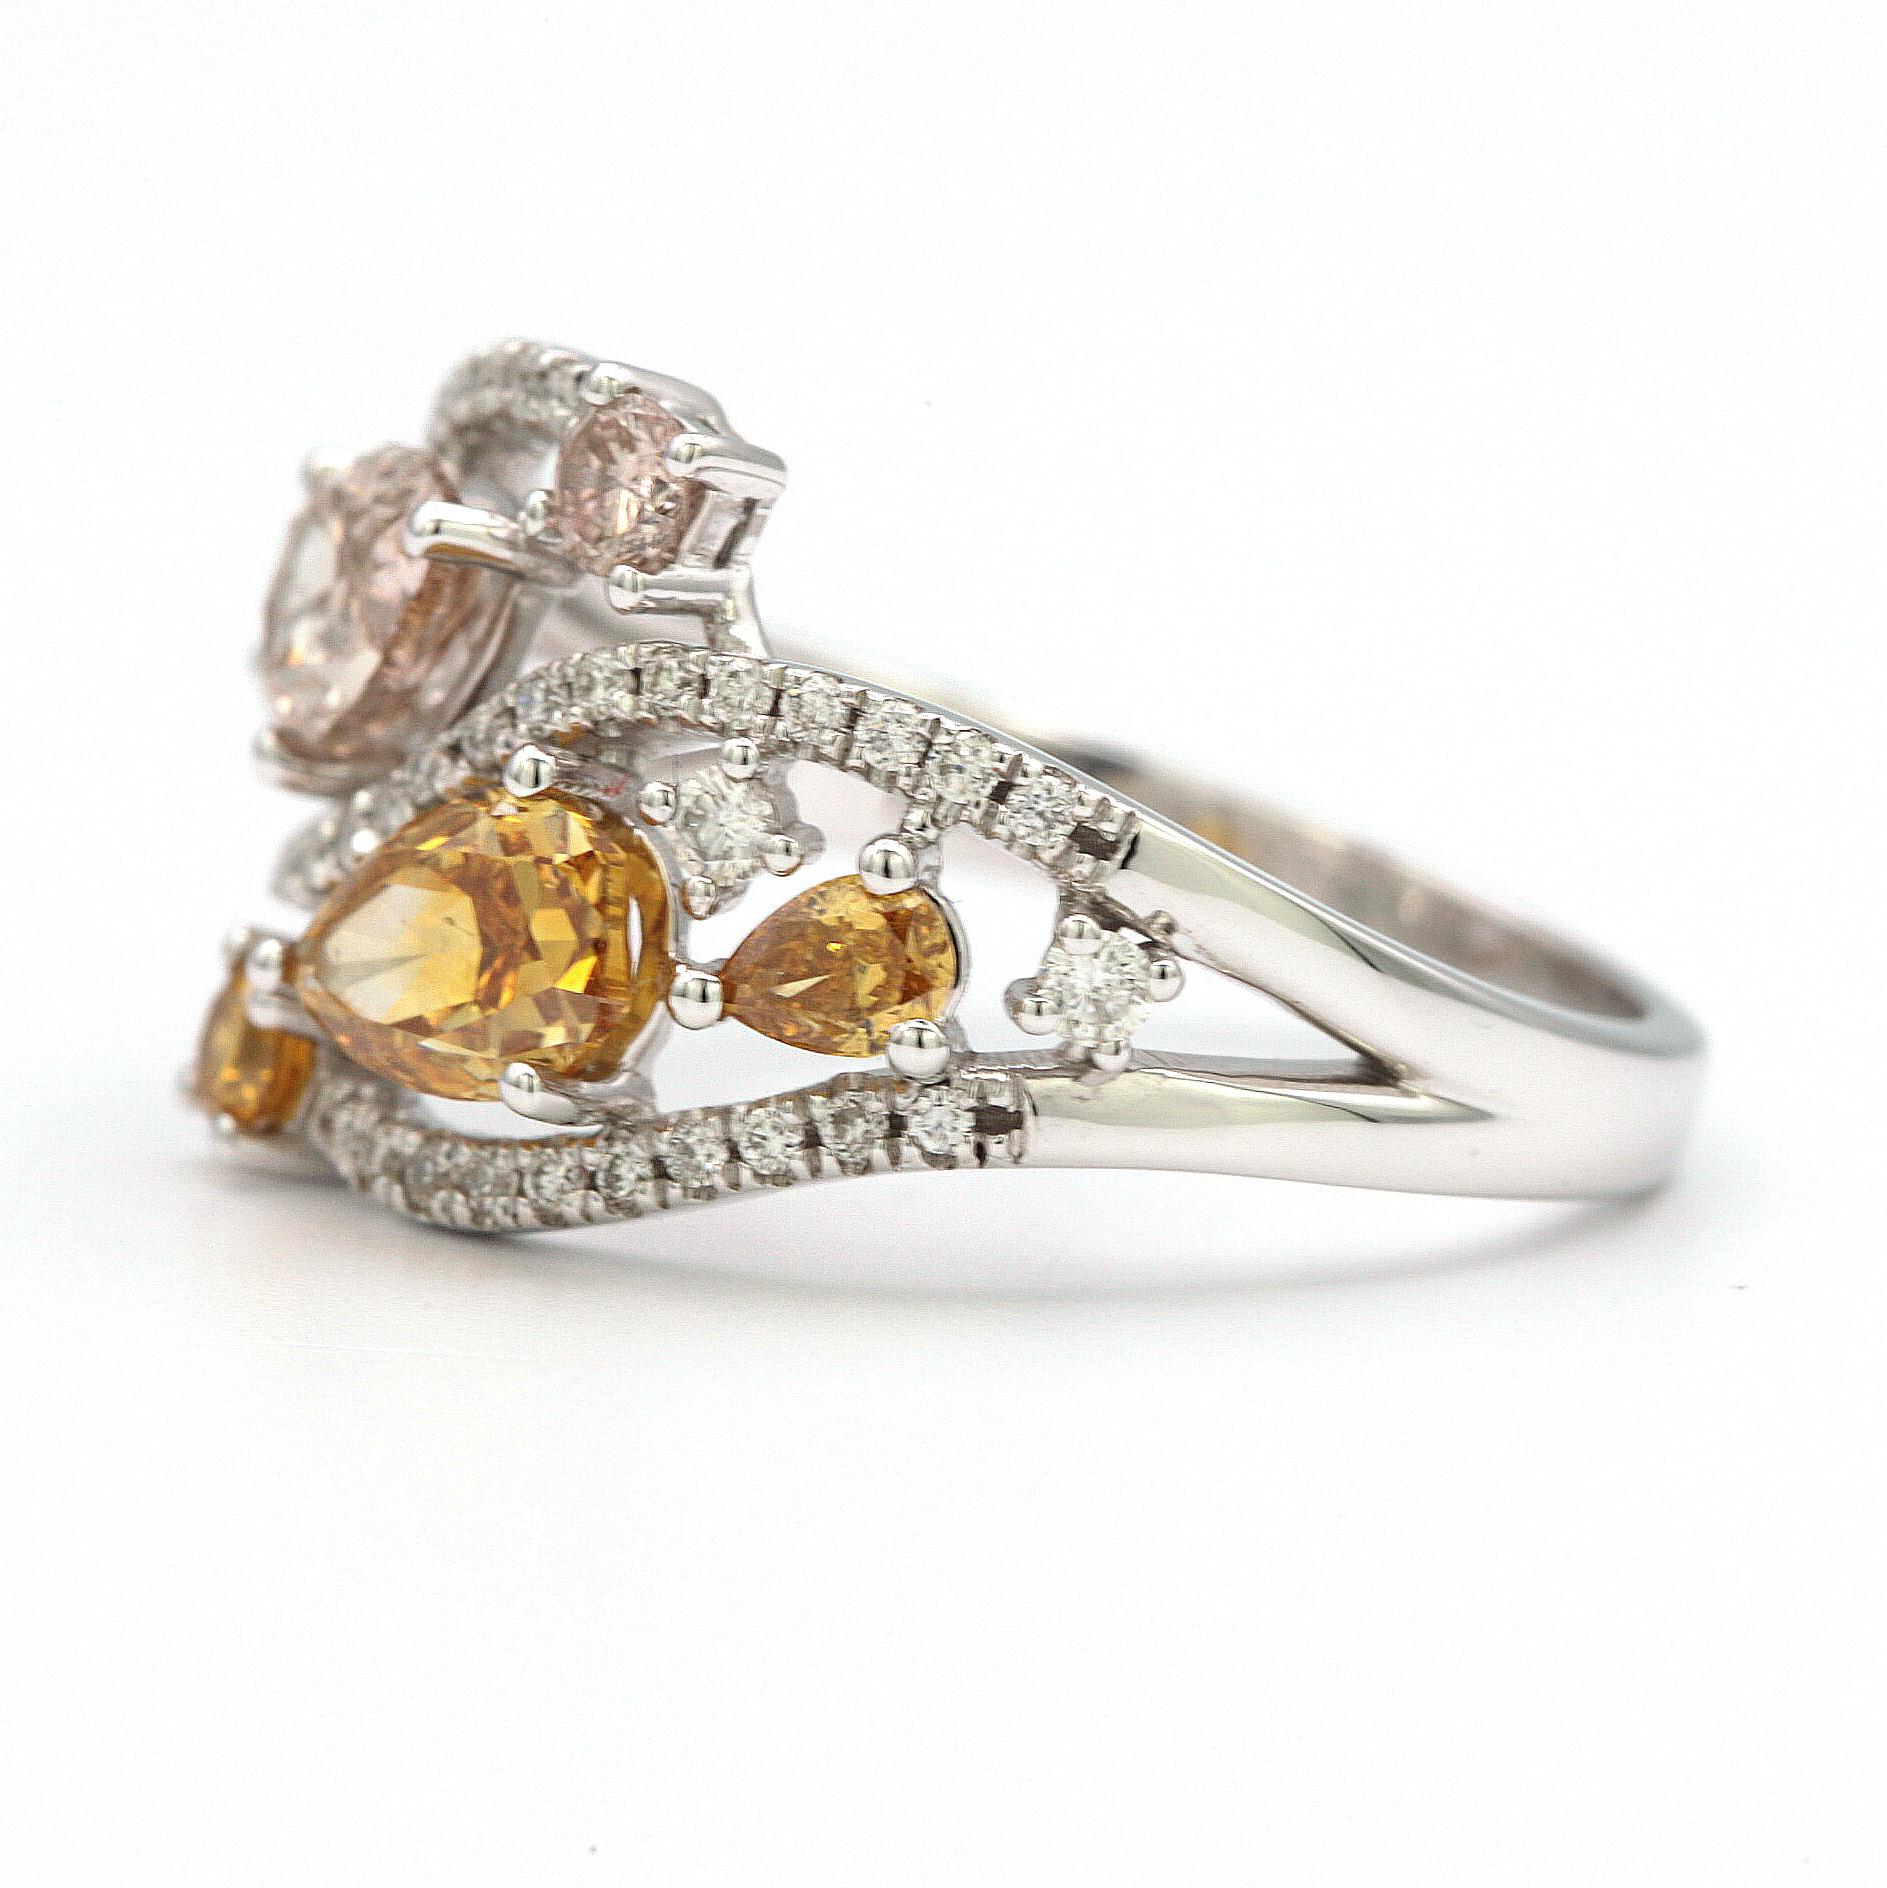 Modern 1.01 Carat Pear Shaped Yellow and Brown Diamond Ring in 18 Karat White Gold For Sale